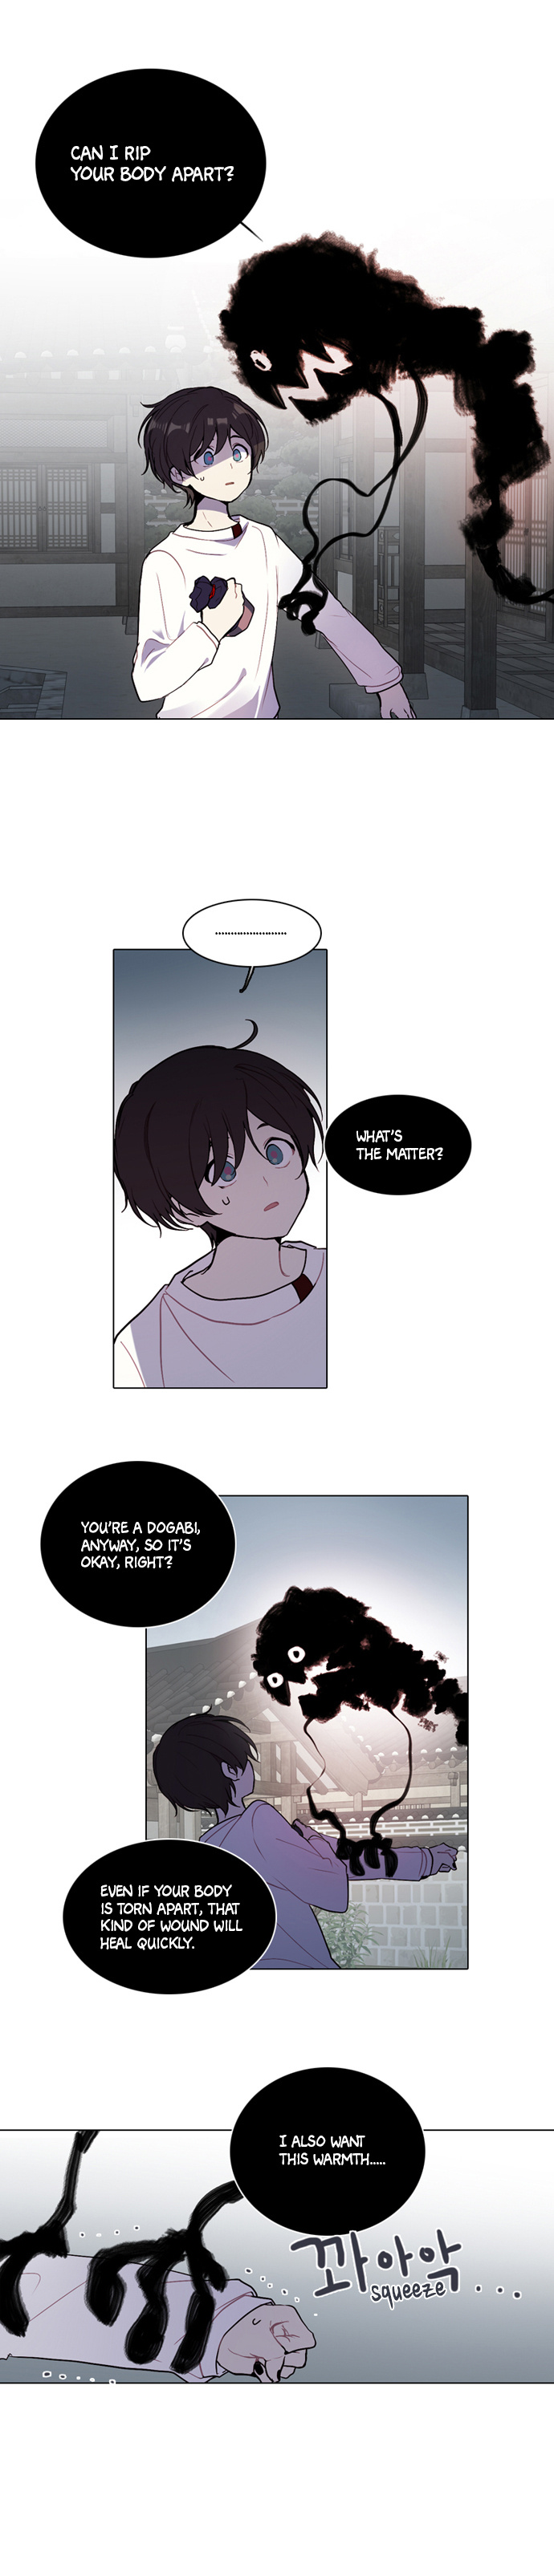 Whenever (Re) - Page 1